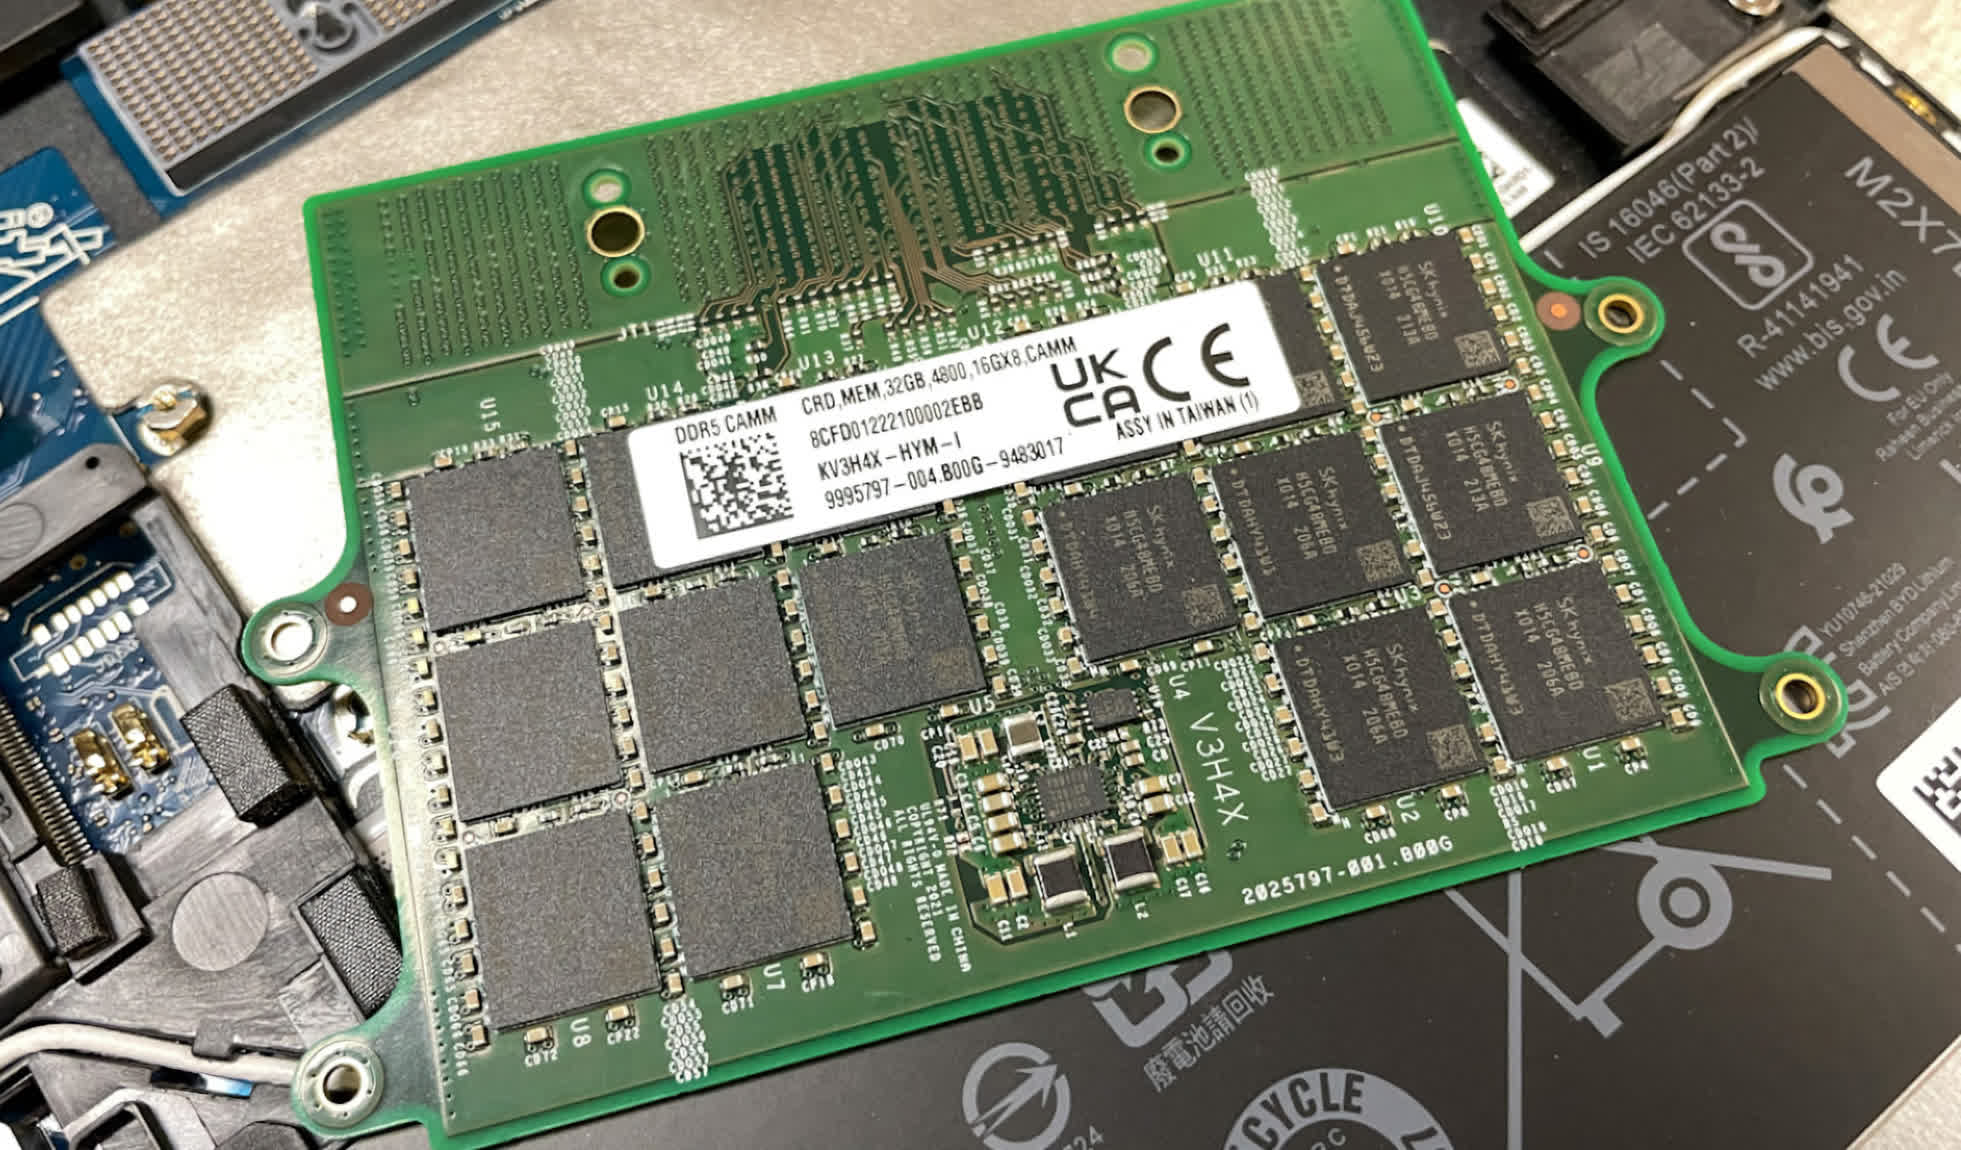 CAMM standard set to replace SO-DIMM for laptop memory